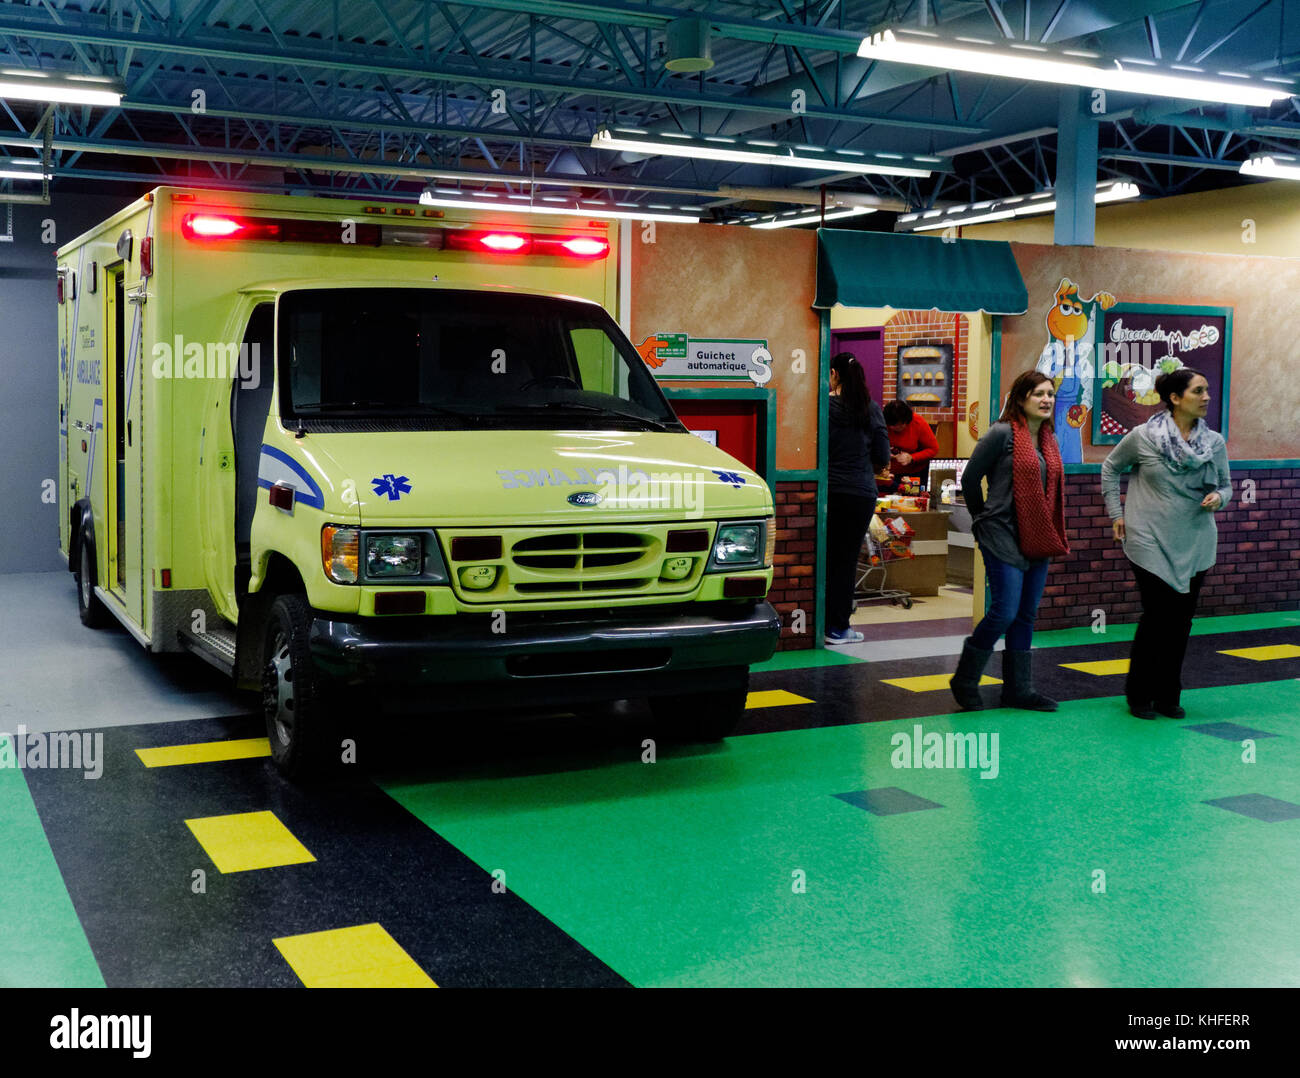 Anambulance im Musee D'Enfance indoor themed Play cenrtre in Laval, Quebec Stockfoto